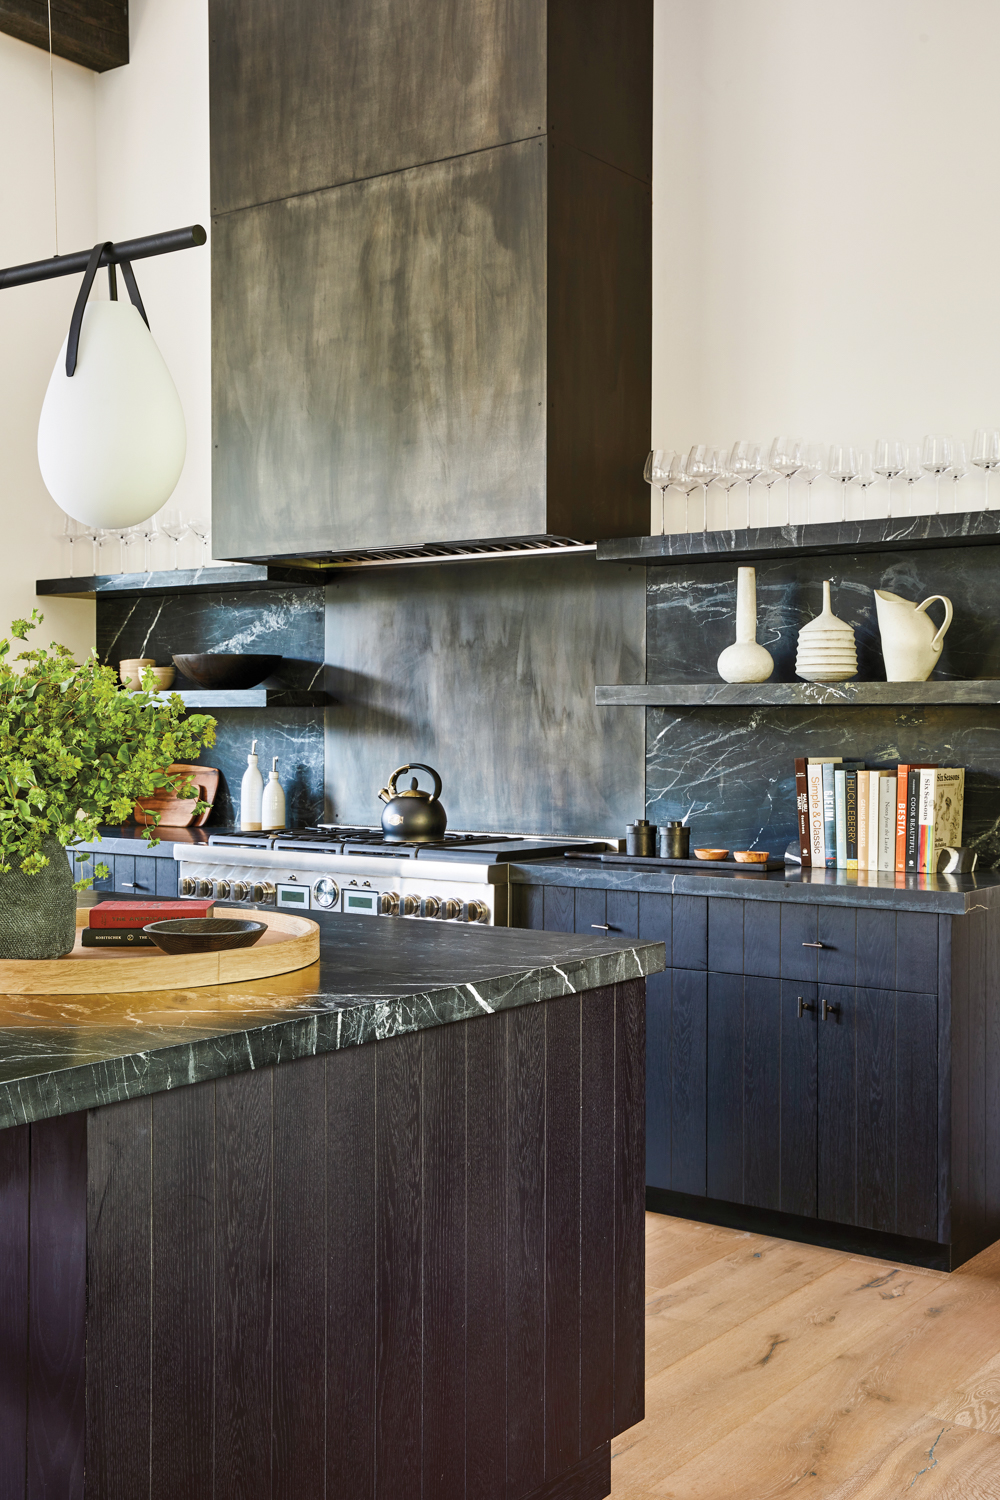 kitchen range is topped with a dark, patinated range hood